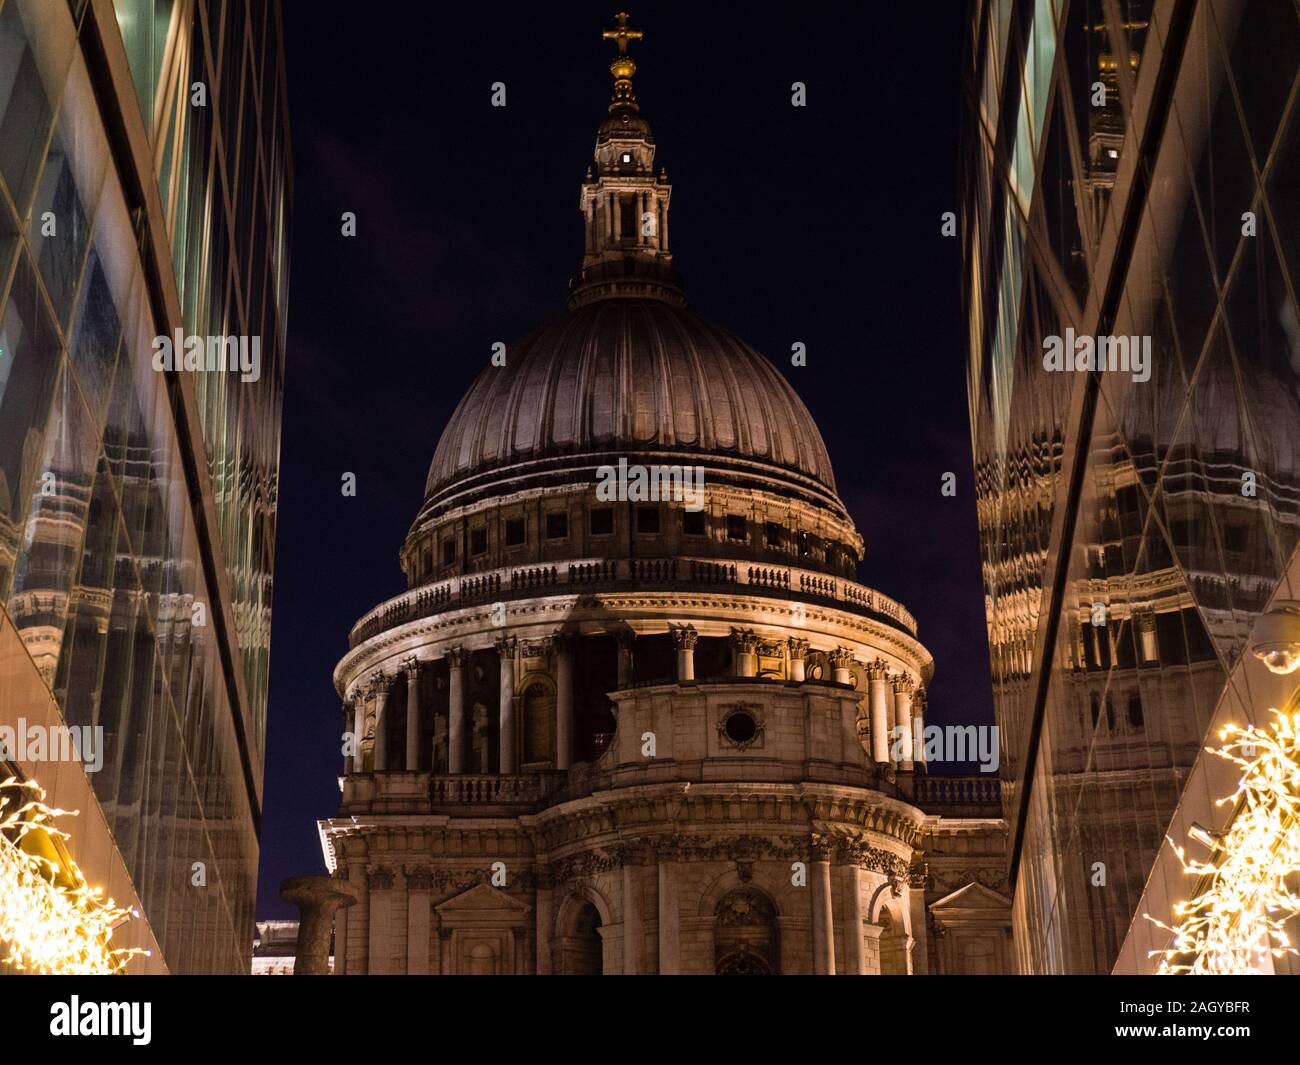 St Paul's Cathedral, Night Time, London, England, UK, GB. Stock Photo